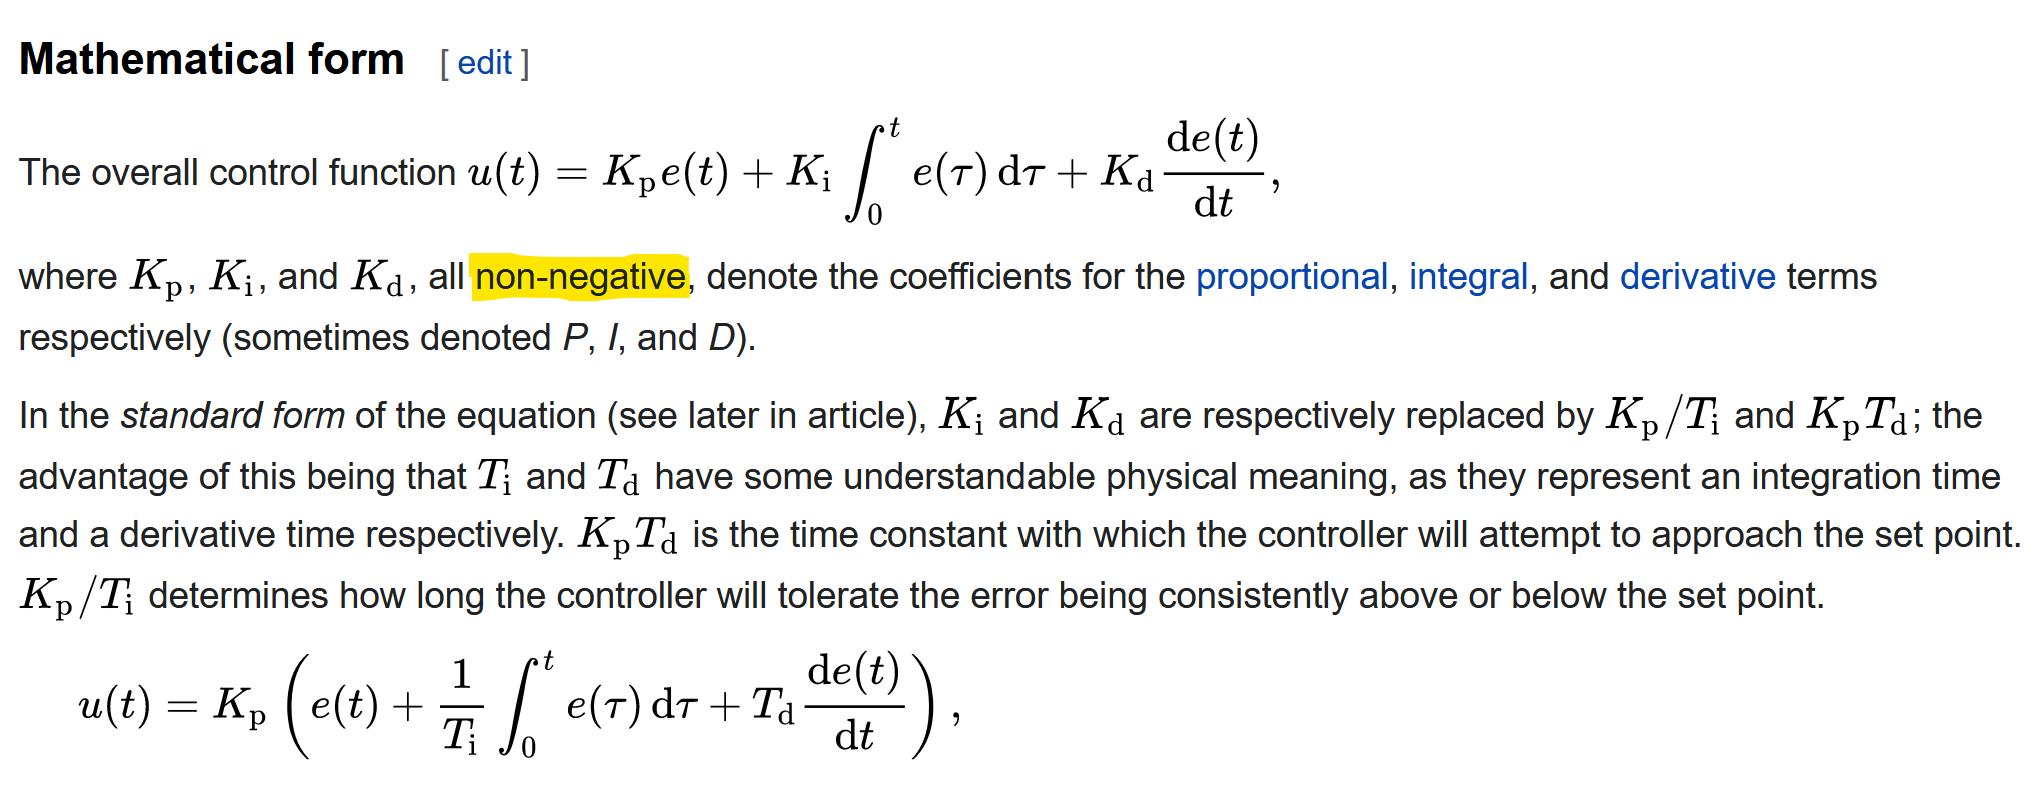 excerpt from Wikipedia page about PID controller with a contract highlighted